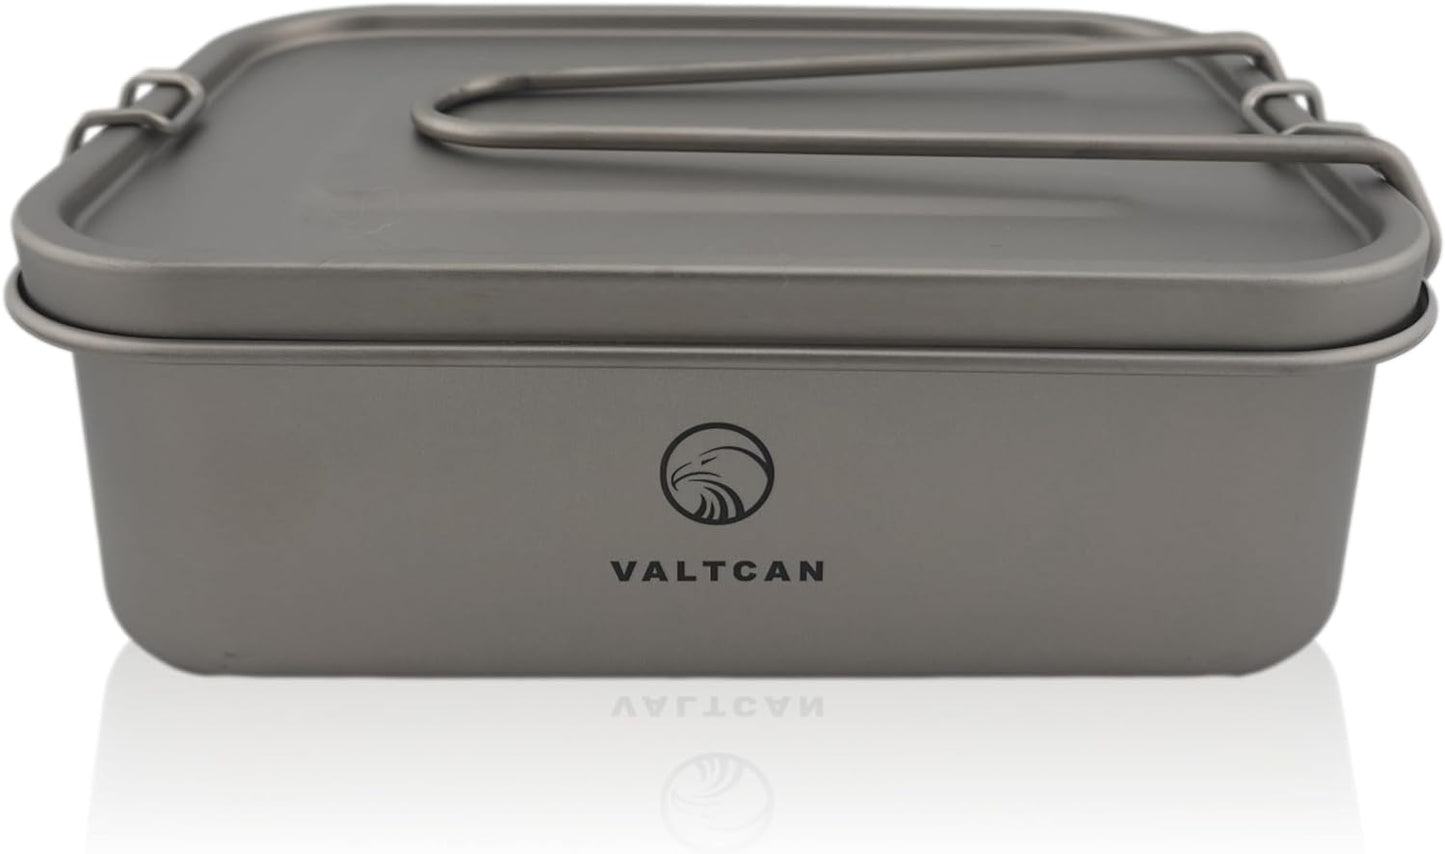 Valtcan Titanium Camping Lunch Bento Box 1200ml with Airtight Lid Seal and Cover Foldable Handle for Heating on Fire Camp Backpacking Container 40 oz Ultralight 254g